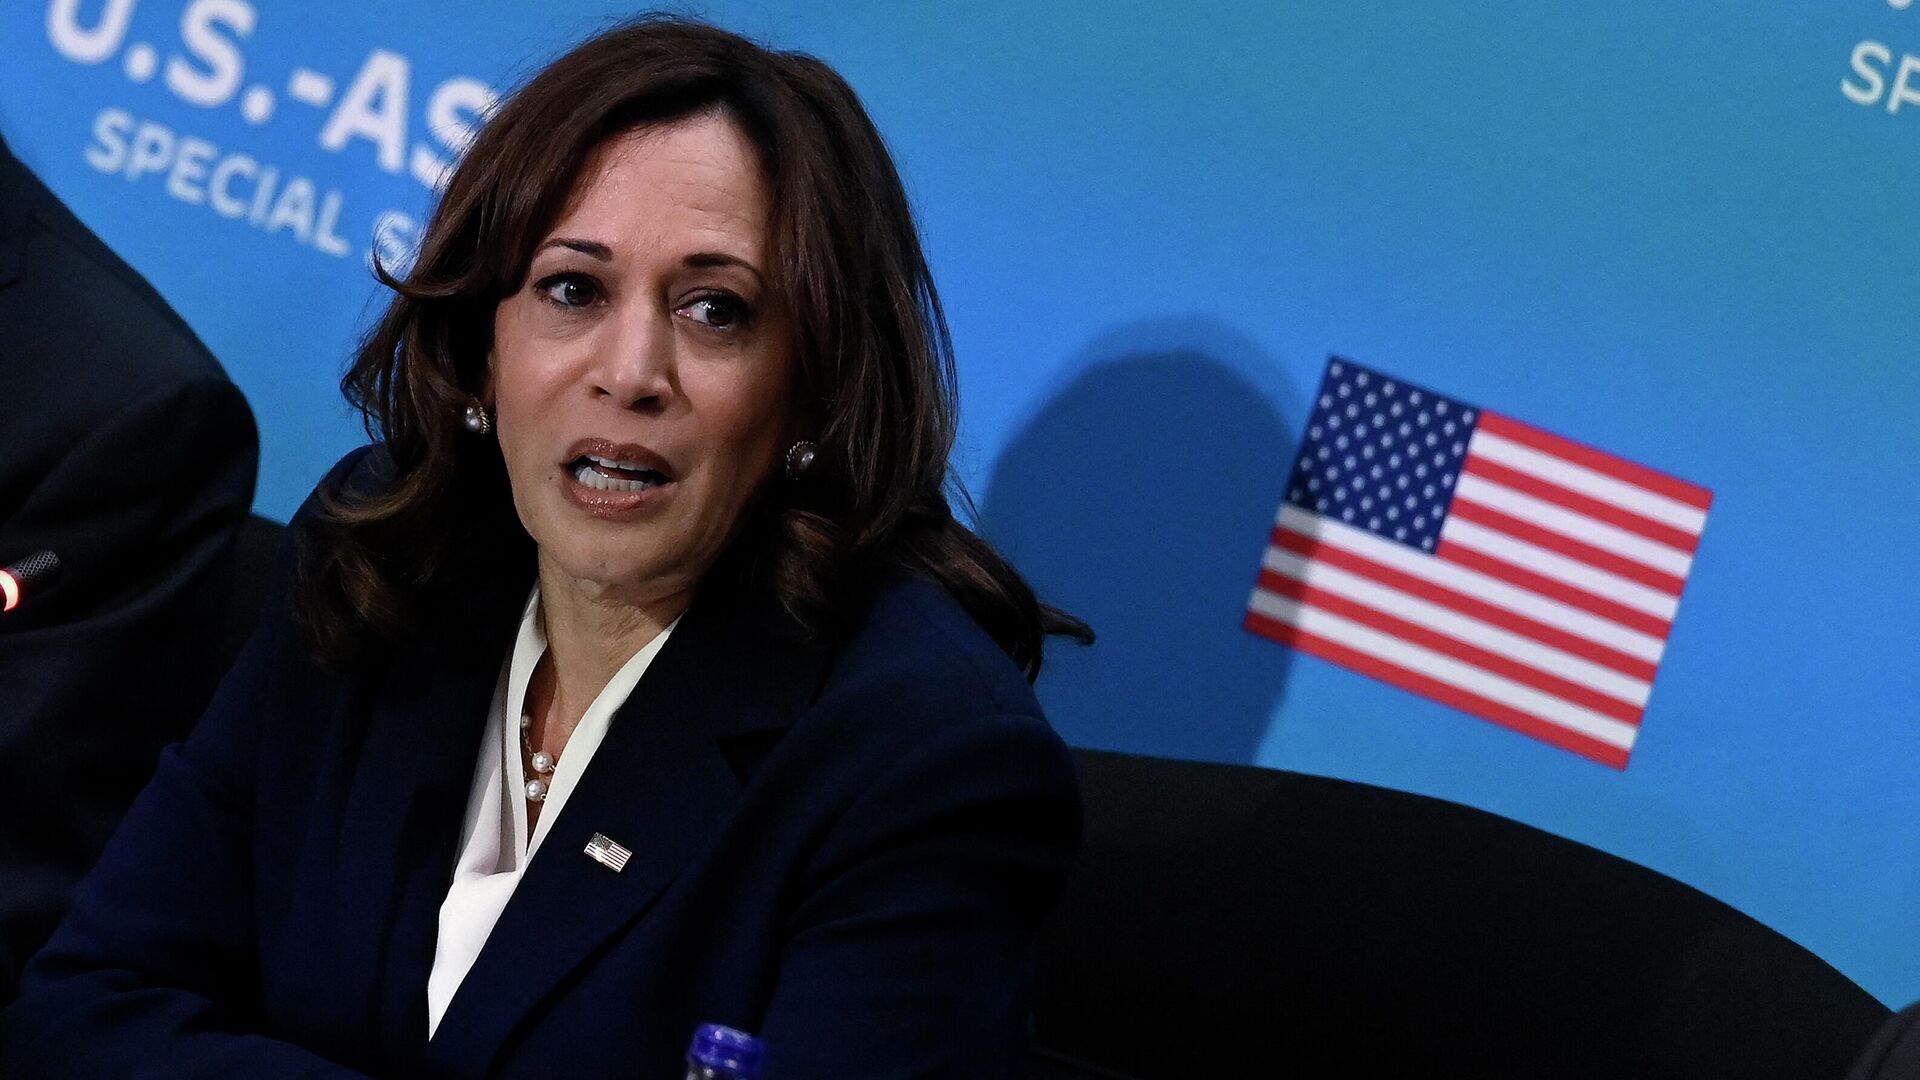 (FILES) In this file photo taken on May 13, 2022, US Vice President Kamala Harris speaks as she meets with the leaders of ASEAN countries, members of the Cabinet, and other Administration officials to discuss climate action, clean energy, and sustainable infrastructure, during the US-ASEAN Special Summit at the State Department in Washington, DC.  - Sputnik International, 1920, 16.05.2022